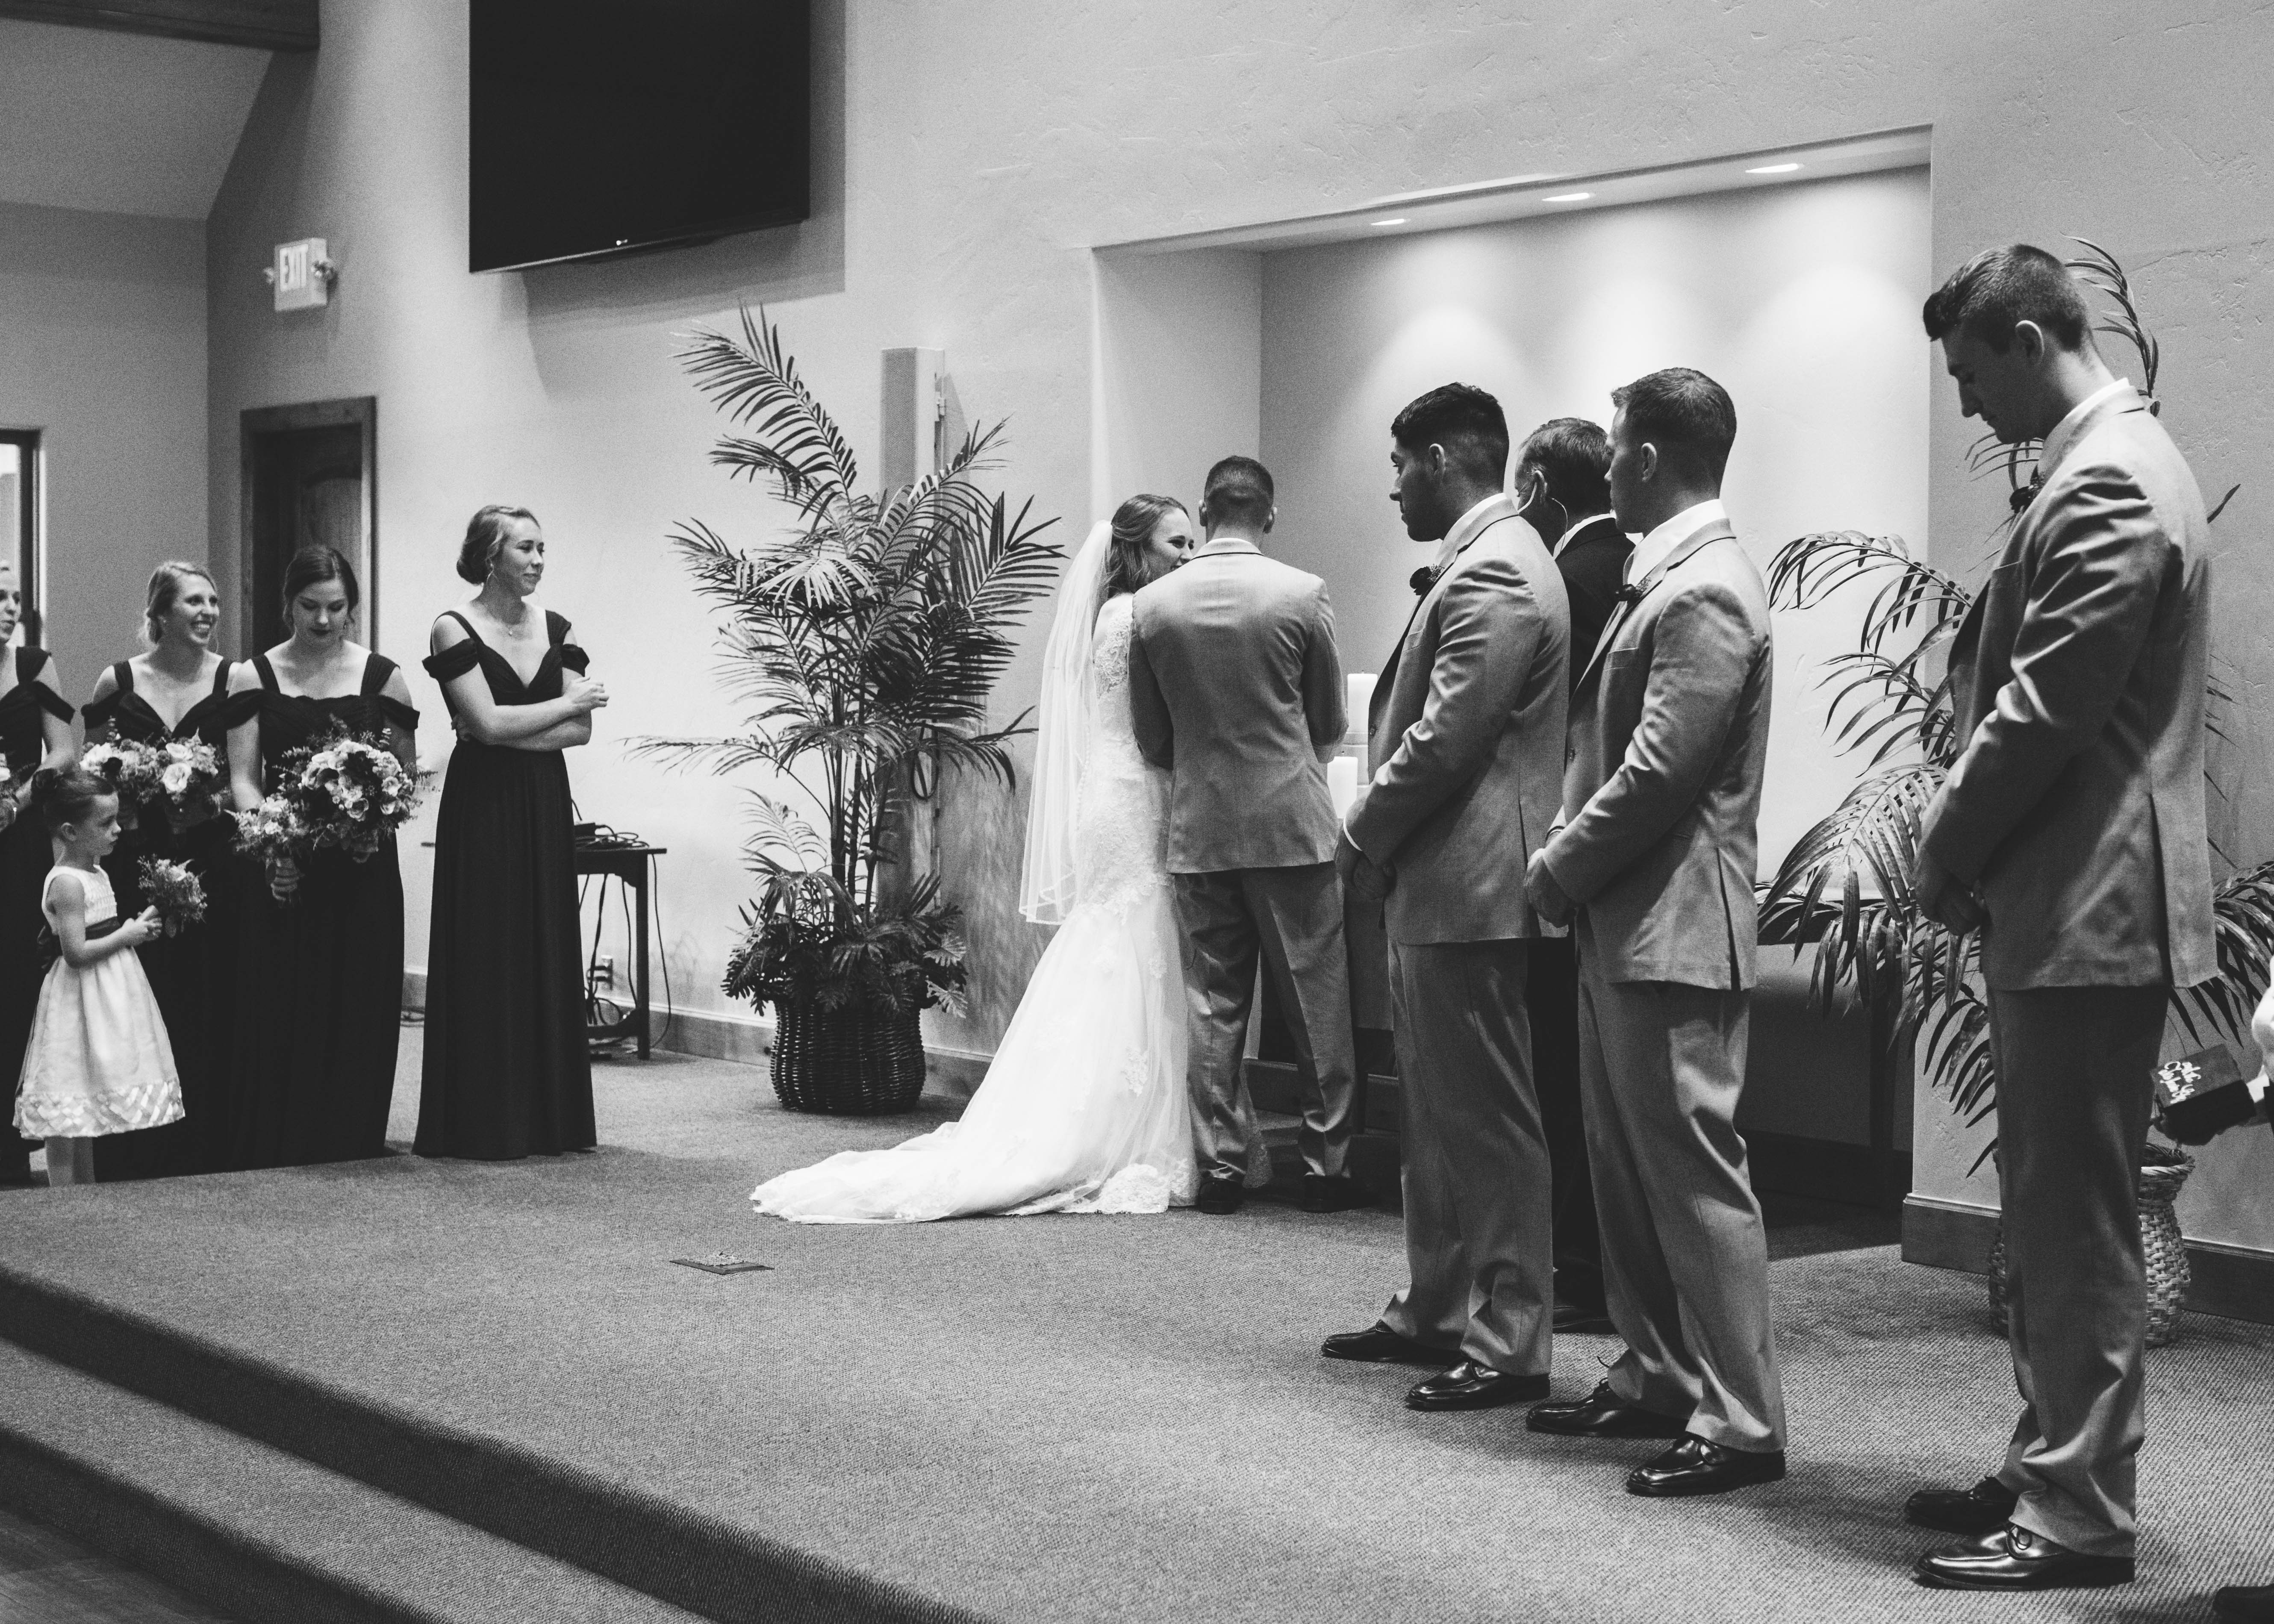 bride and groom tie strand of three chord together during ceremony